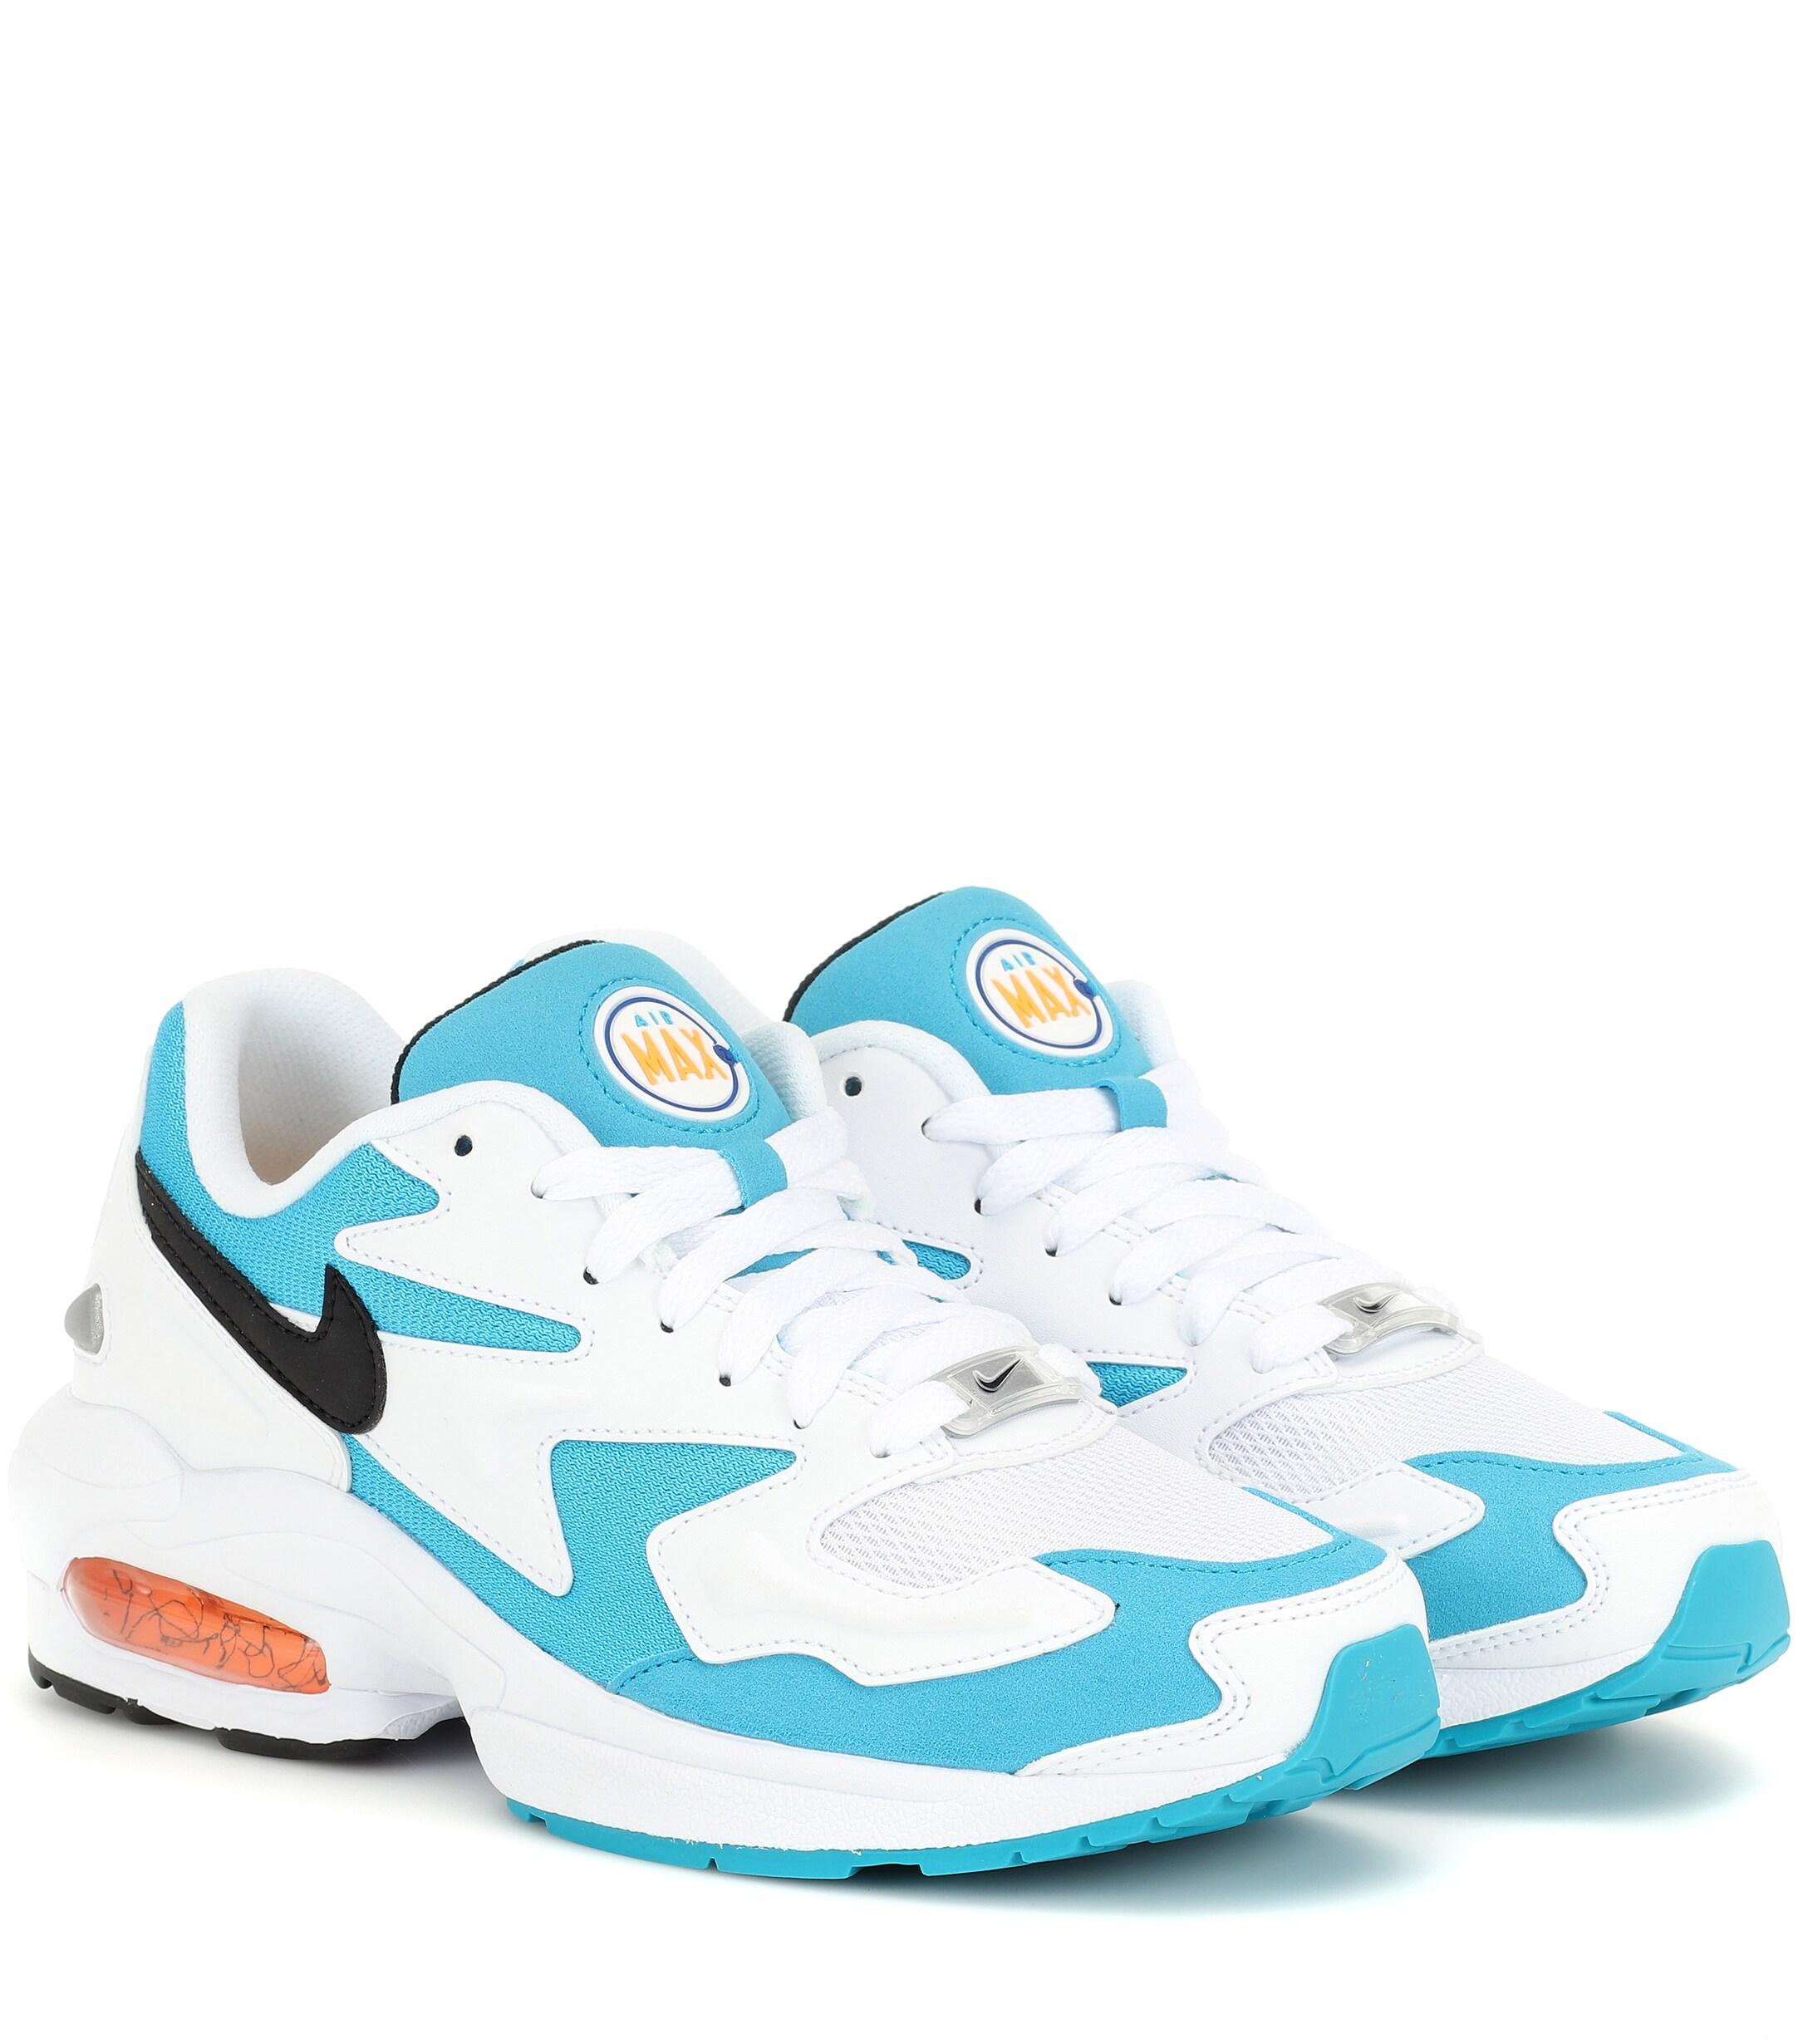 Nike Suede Air Max 2 Light ''blue Lagoon'' in White/Blue (White) - Save 40%  - Lyst